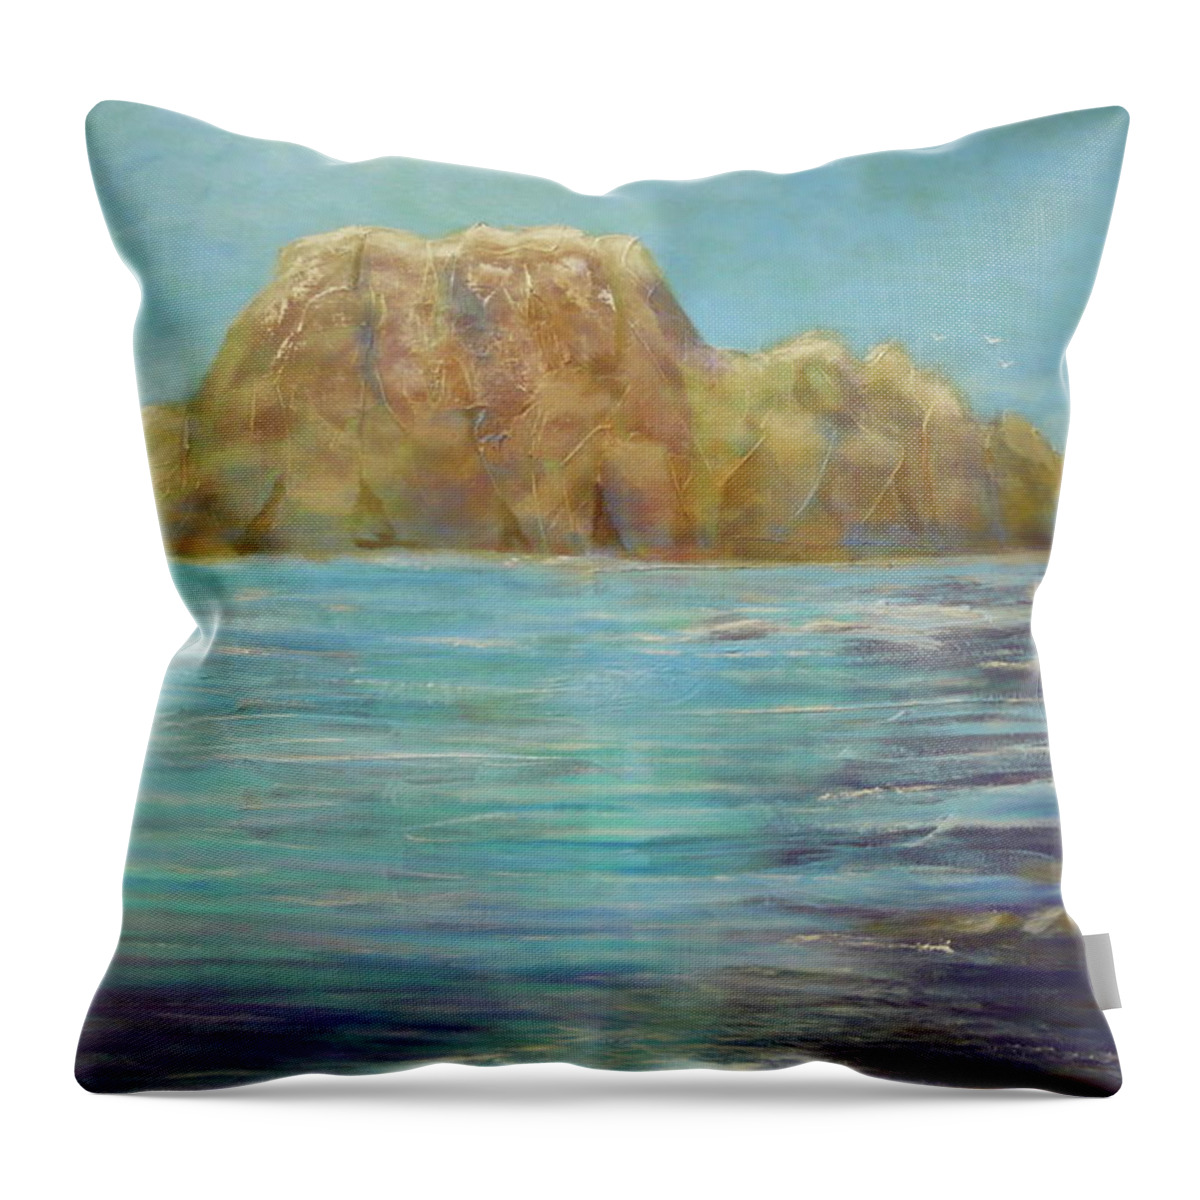 Mysterious Throw Pillow featuring the painting Mysterious Island by Monika Shepherdson